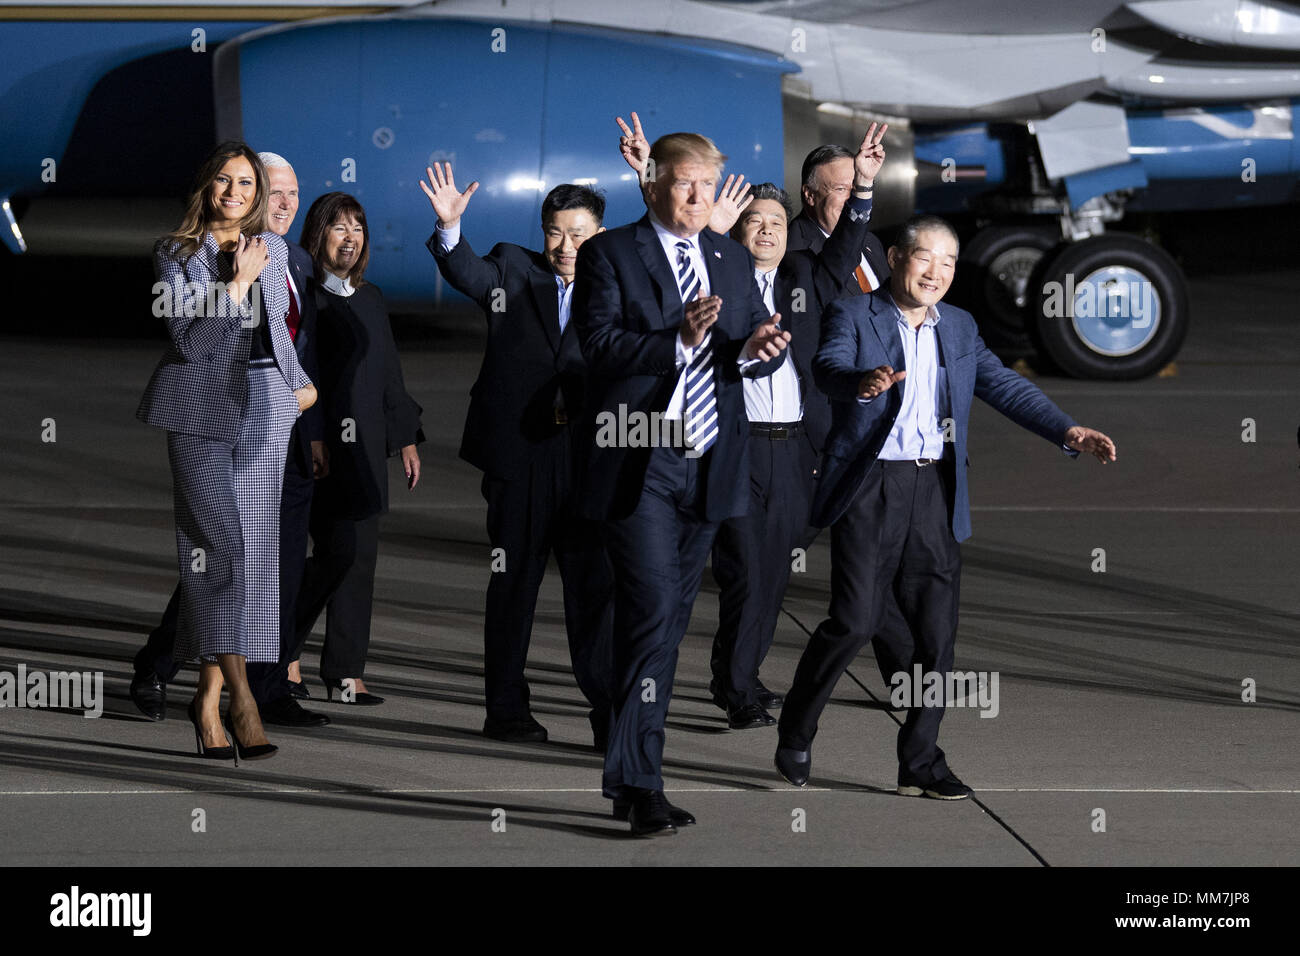 Suitland, MD, USA. 10th May, 2018. President DONALD TRUMP and his wife MELANIA TRUMP leaving the plane with the three American detainees (KIM DONG-CHUL, KIM HAK-SONG, and TONY KIM) held in captivity in North Korea along with Secretary of State MIKE POMPEO, at Joint Base Andrews in Suitland, Maryland on May 10, 2018. Credit: Michael Brochstein/ZUMA Wire/Alamy Live News Stock Photo